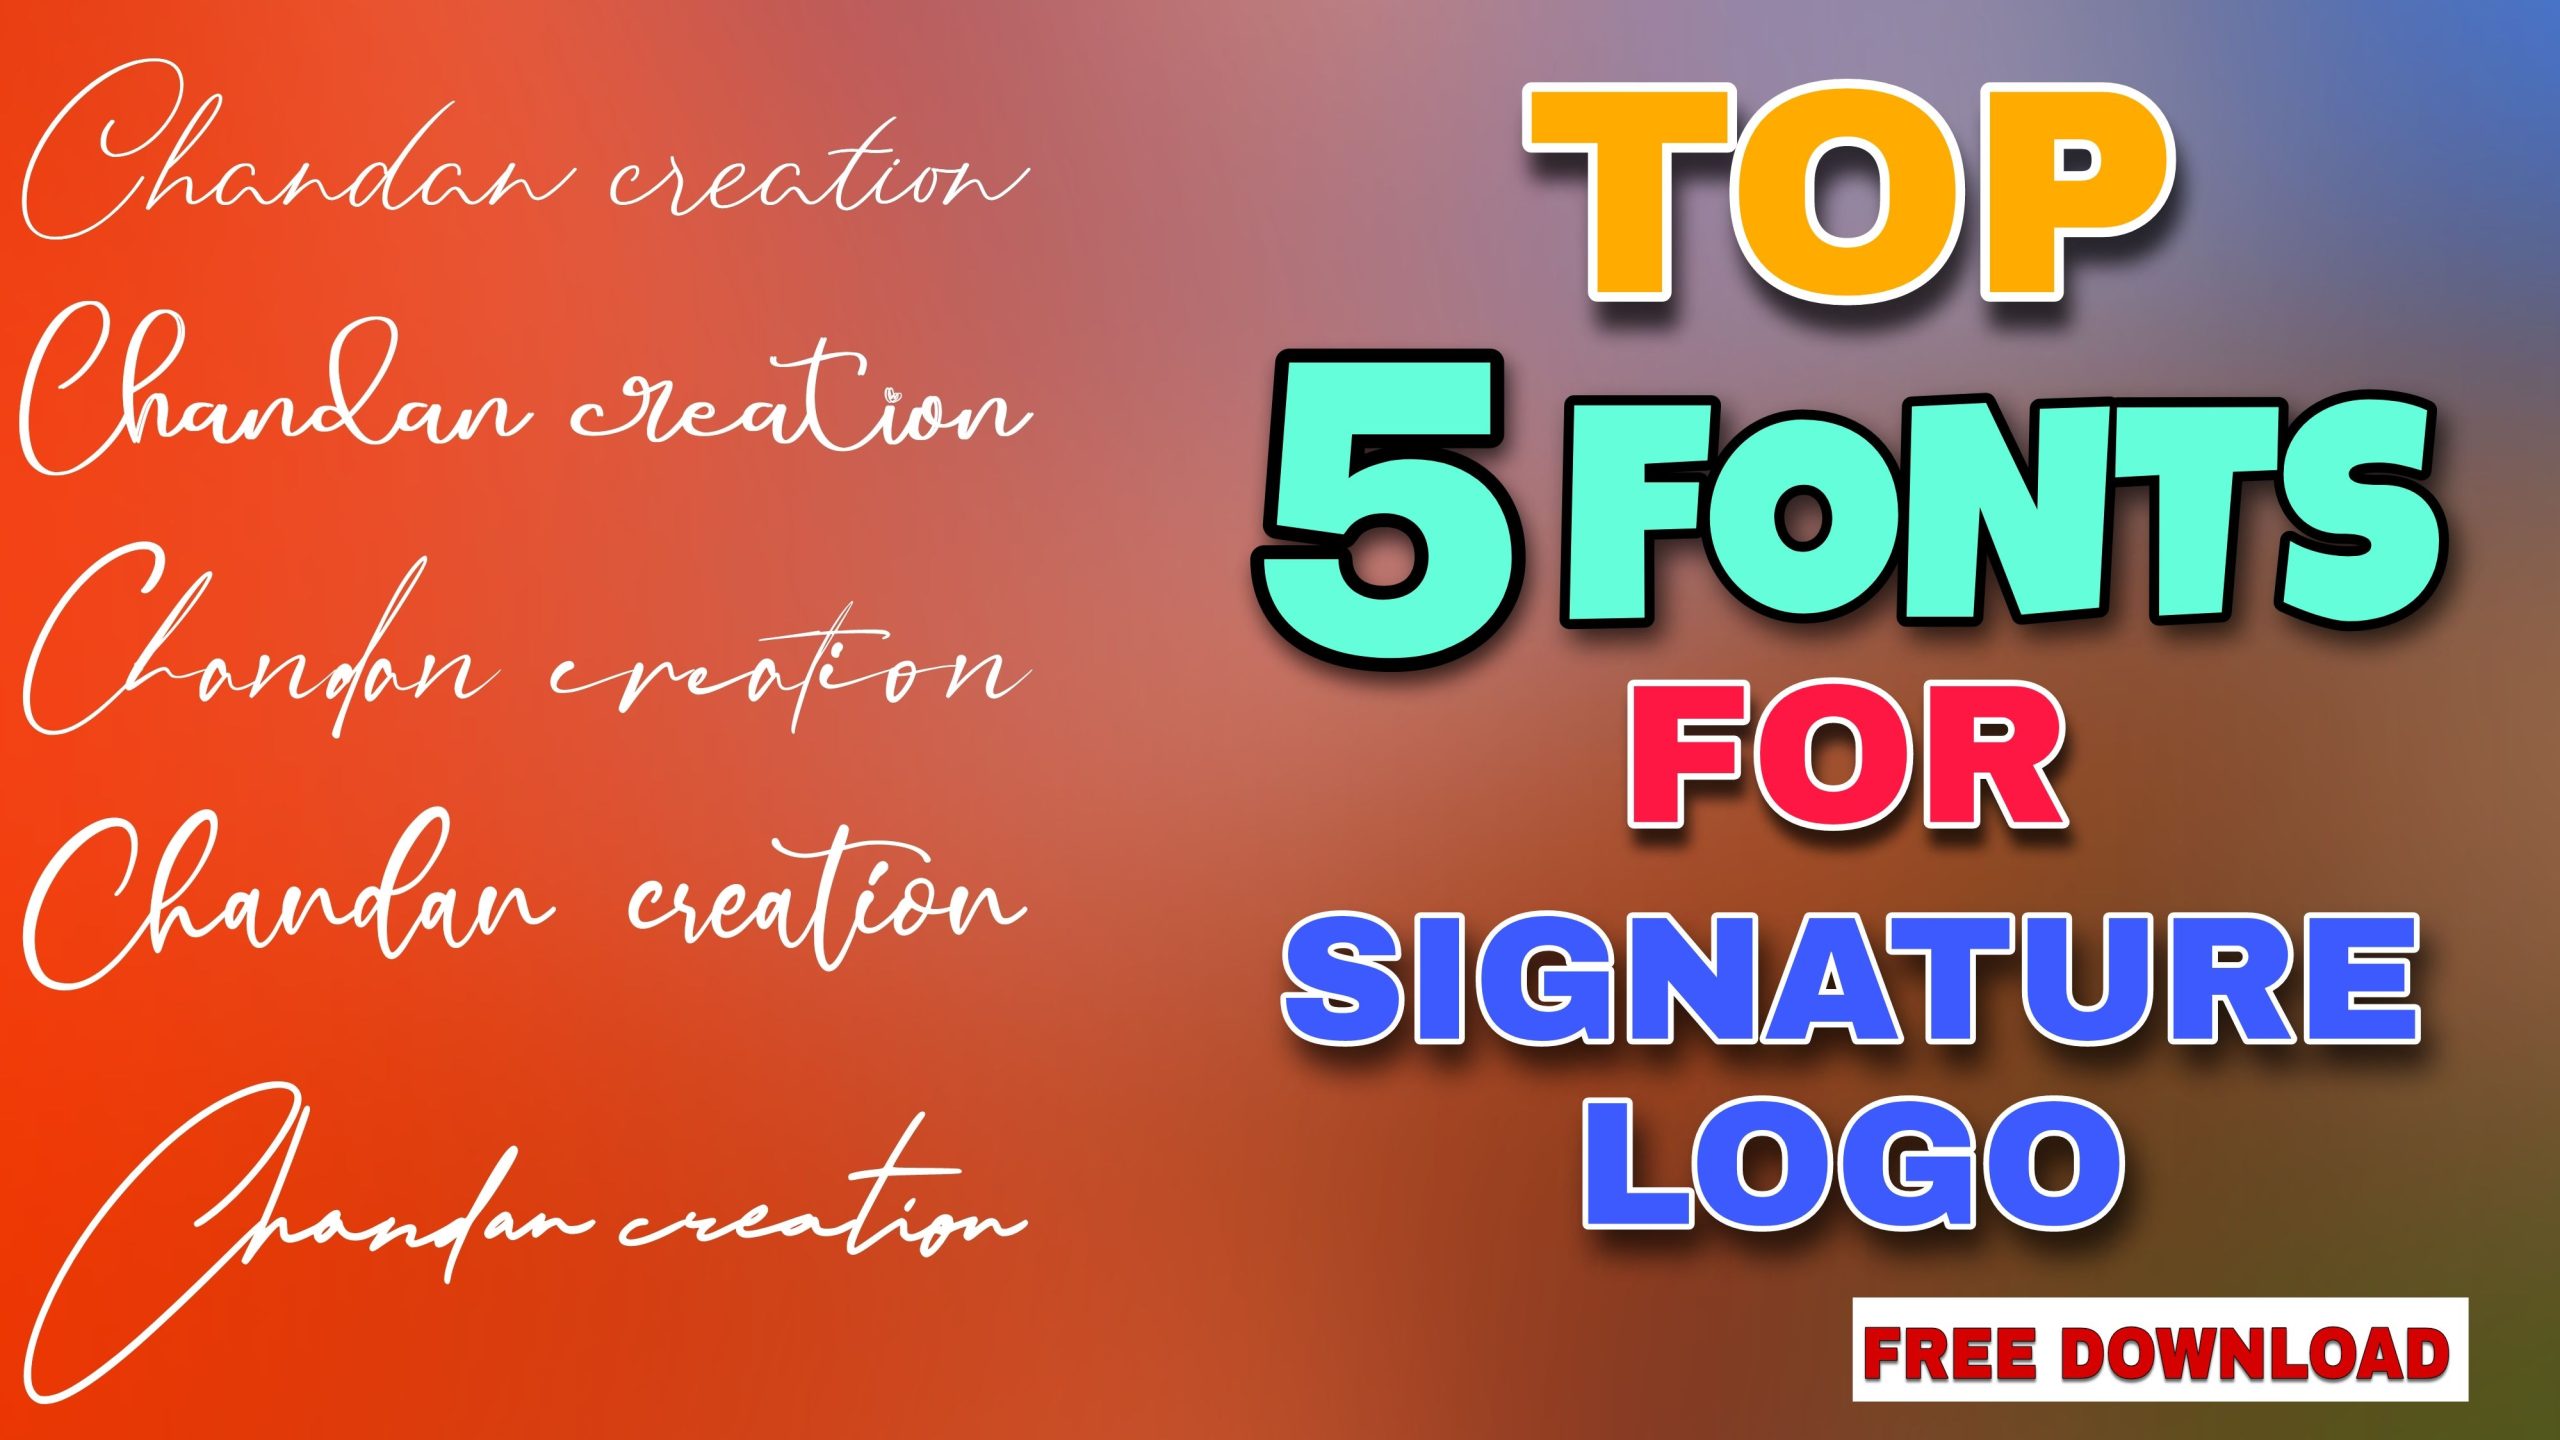 You are currently viewing Top 5 fonts for signature logo